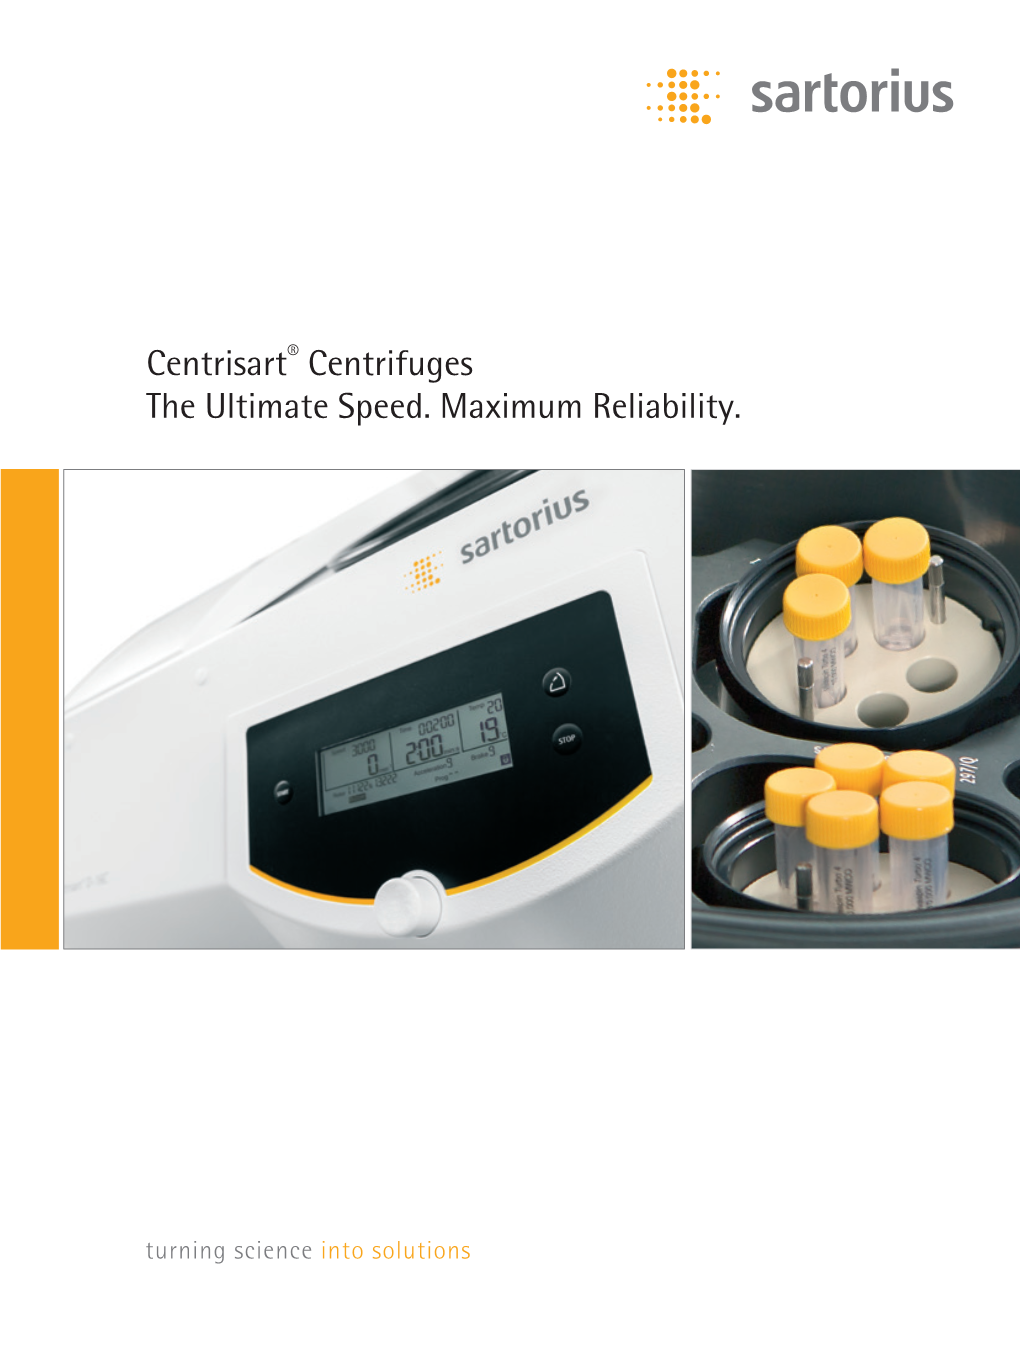 Centrisart® Centrifuges the Ultimate Speed. Maximum Reliability. the Right Solution for Every Application